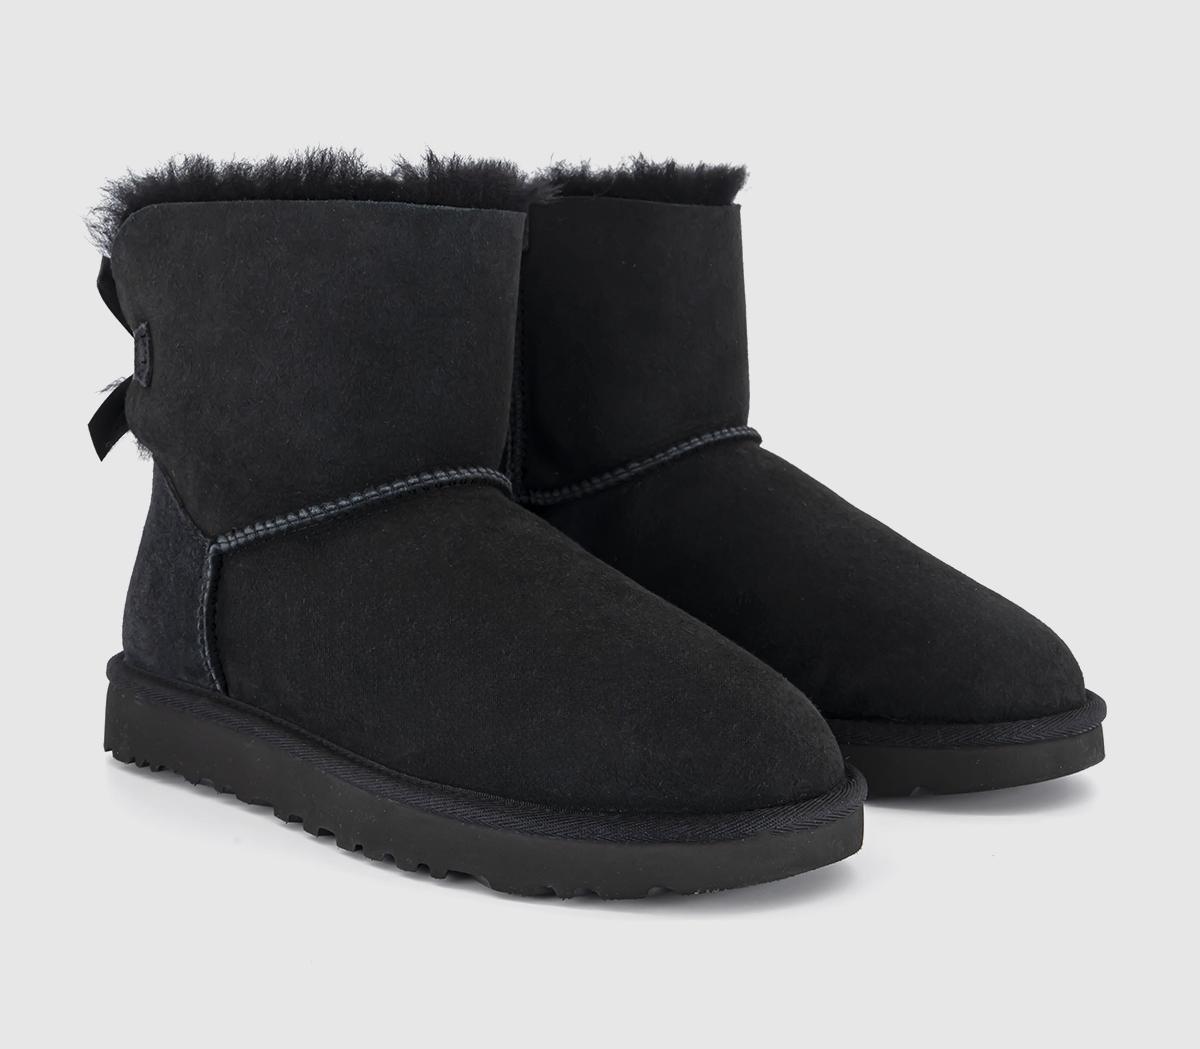 UGG Mini Bailey Bow Boots Black Suede - Ankle Boots